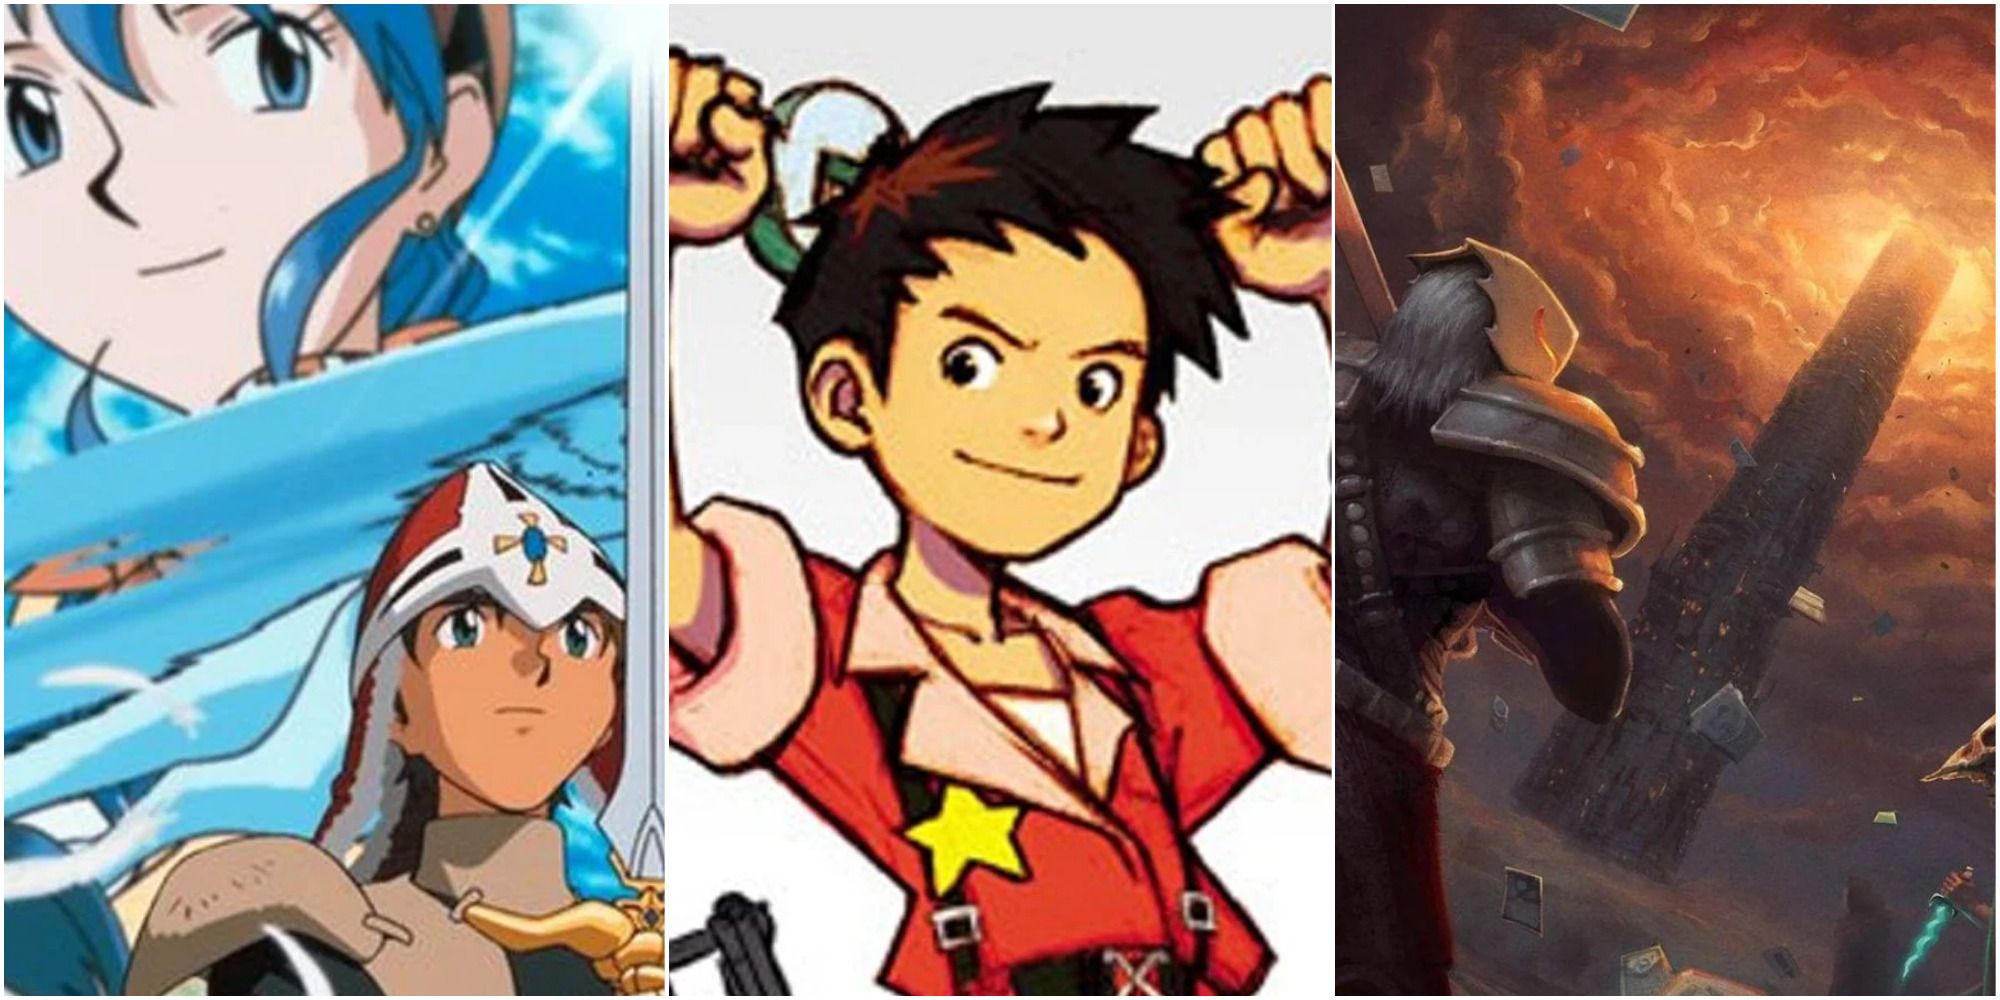 A collage of images from Lunar: Silver Star Story, Advance Wars, and Slay The Spire